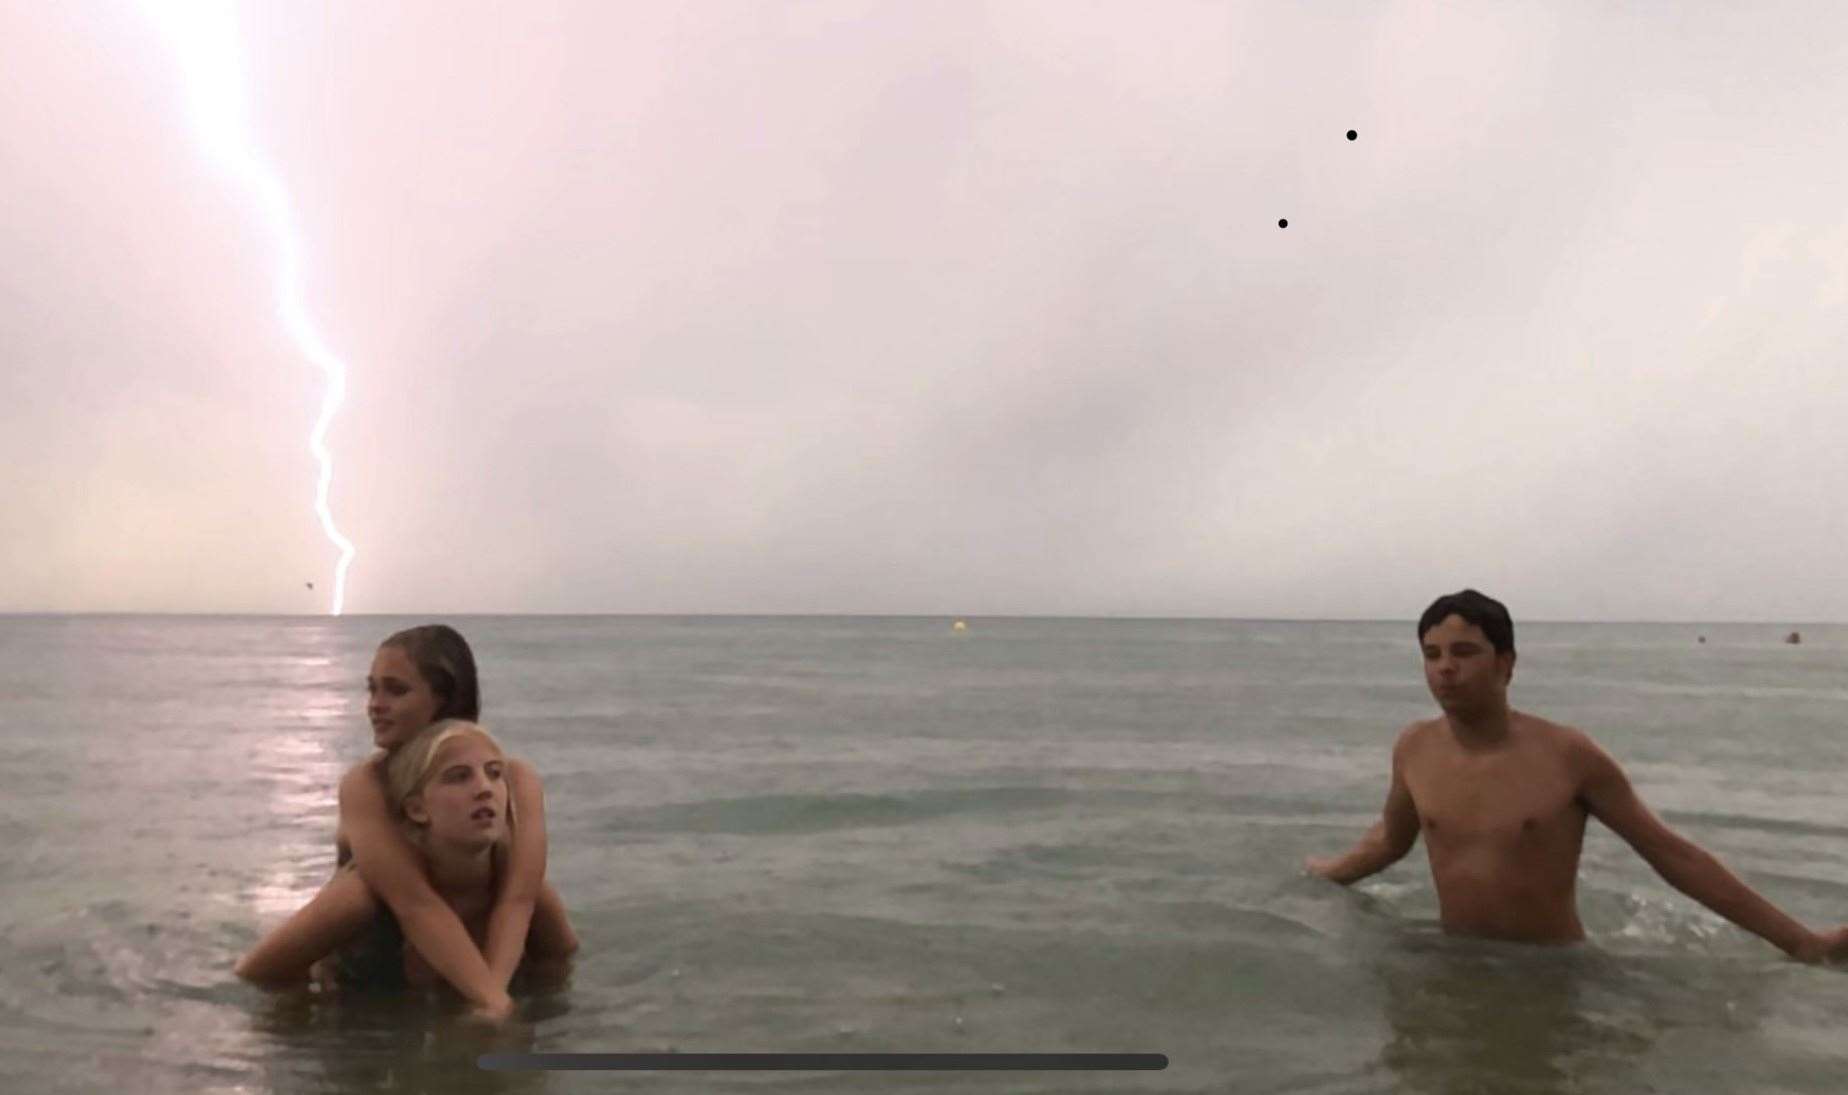 One beach-goer got more than they bargained for when they snapped lightning hitting the sea